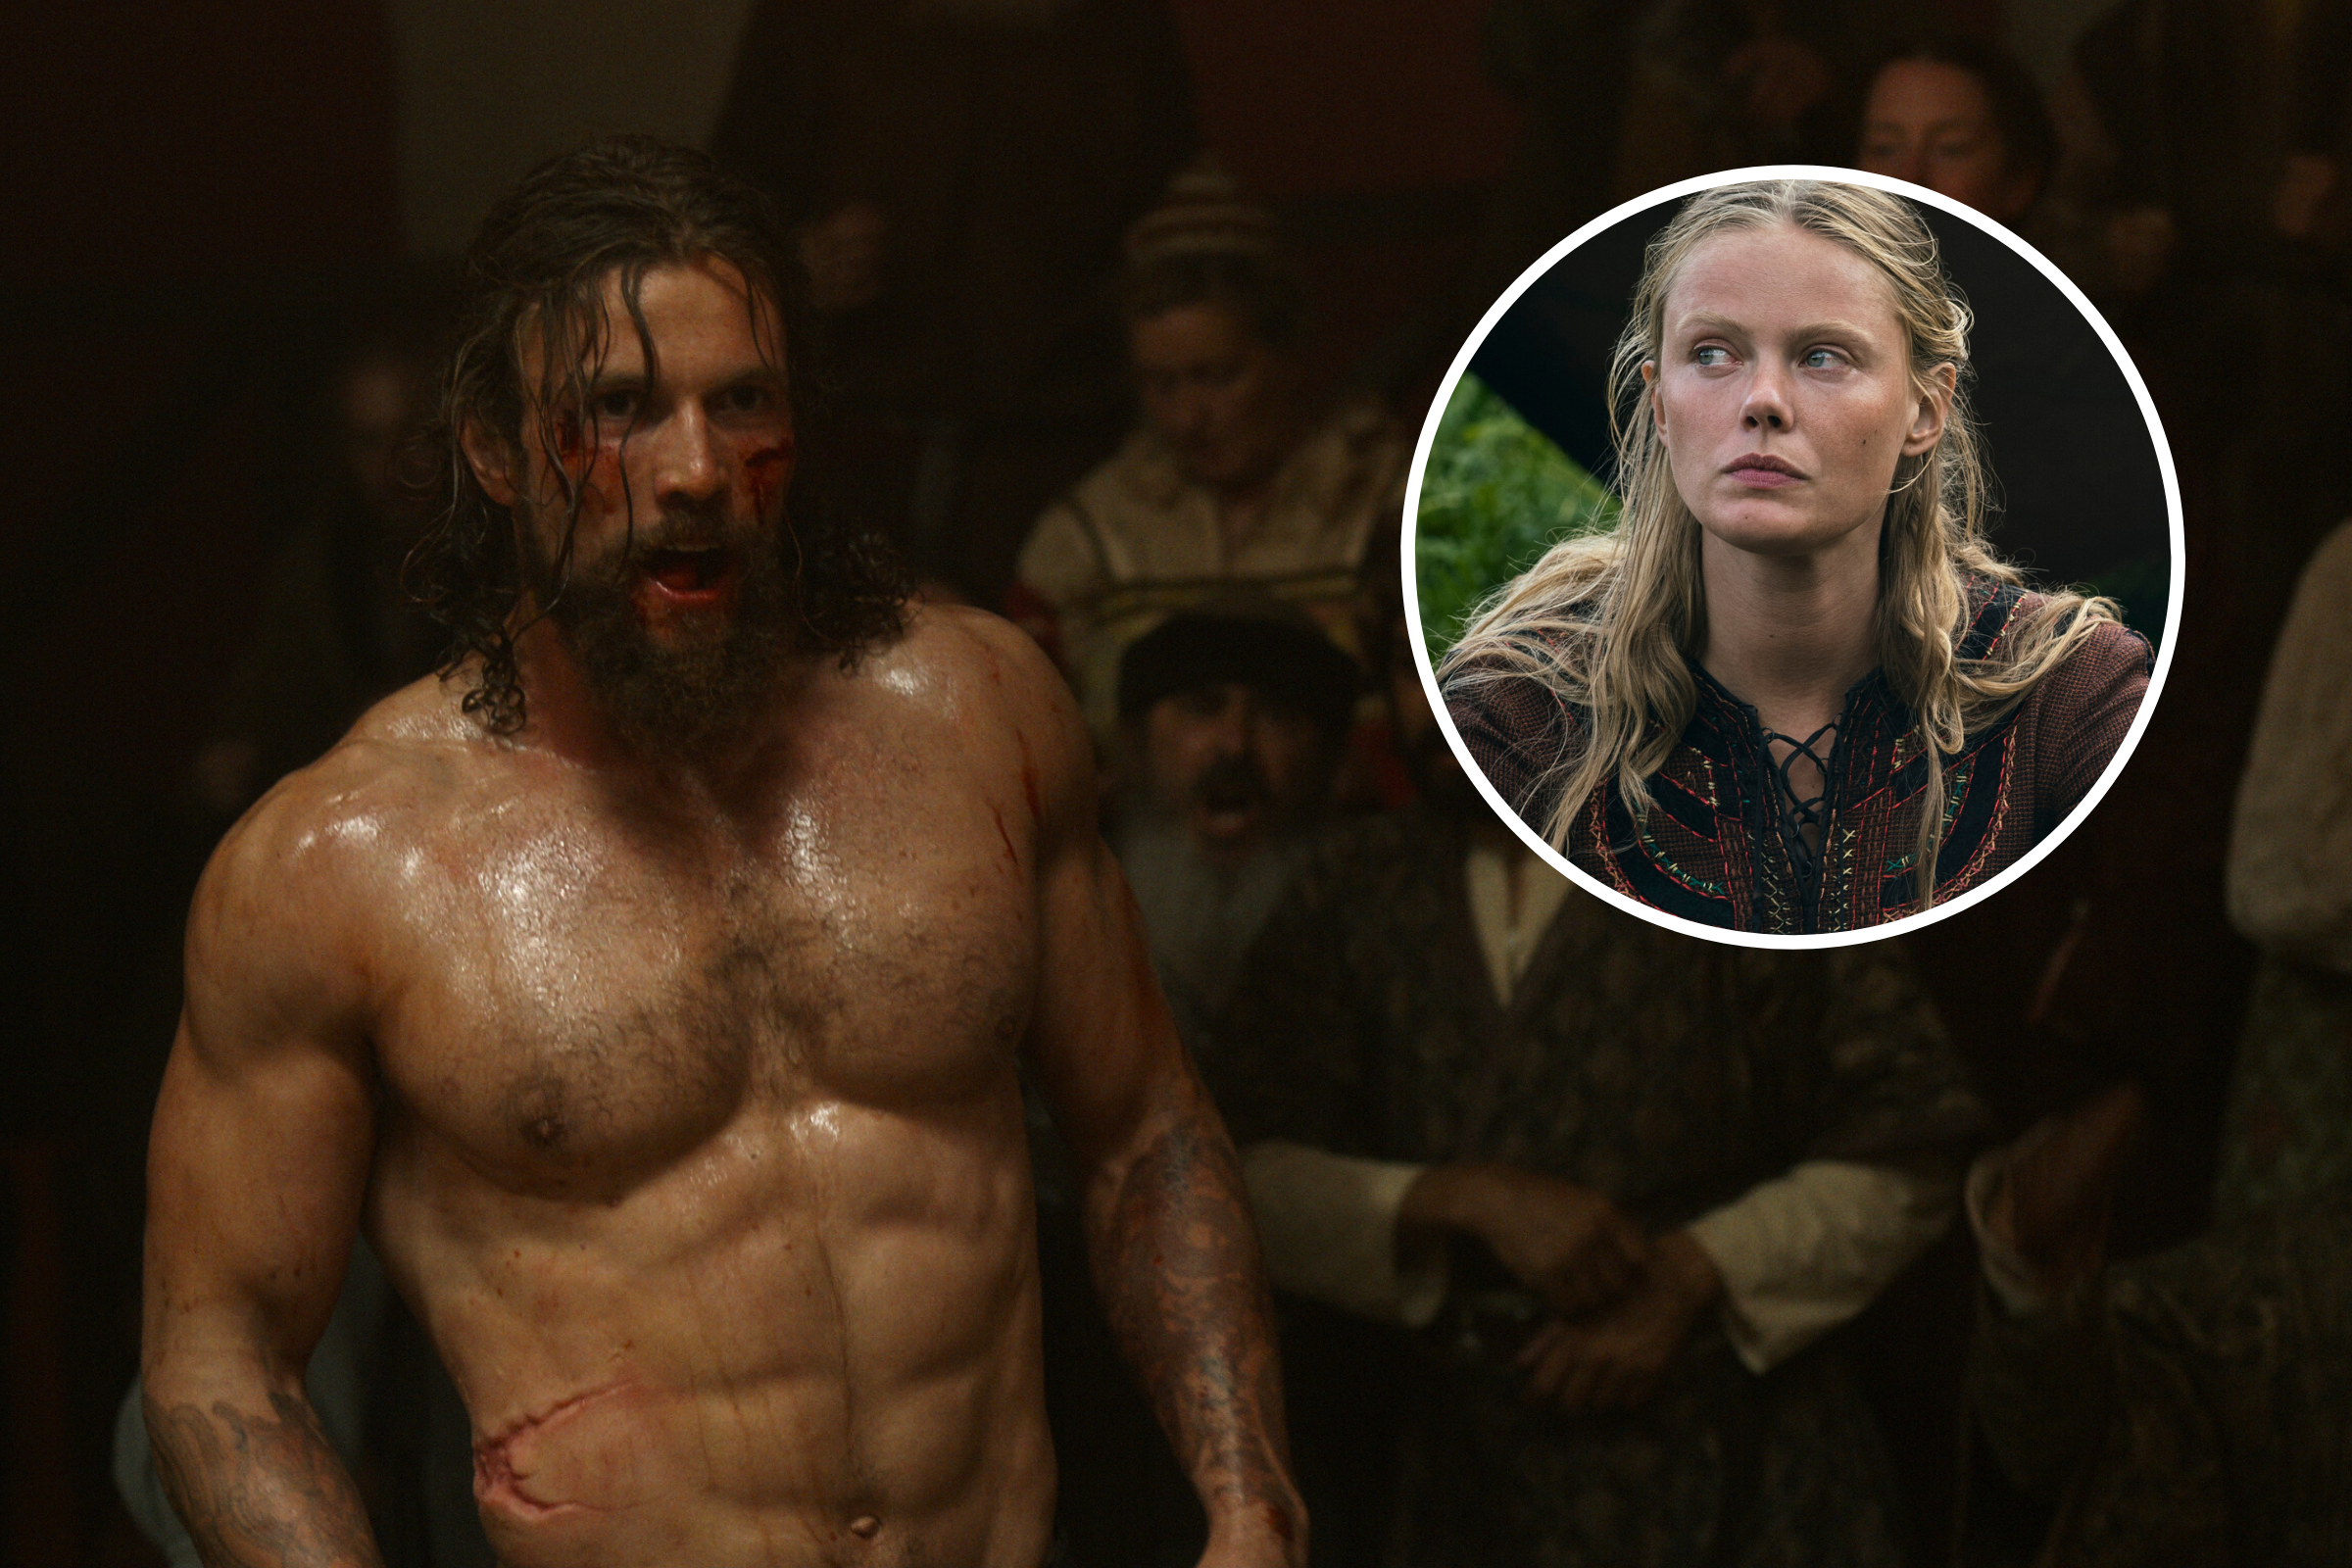 What The Cast Of Vikings: Valhalla Looks Like In Real Life